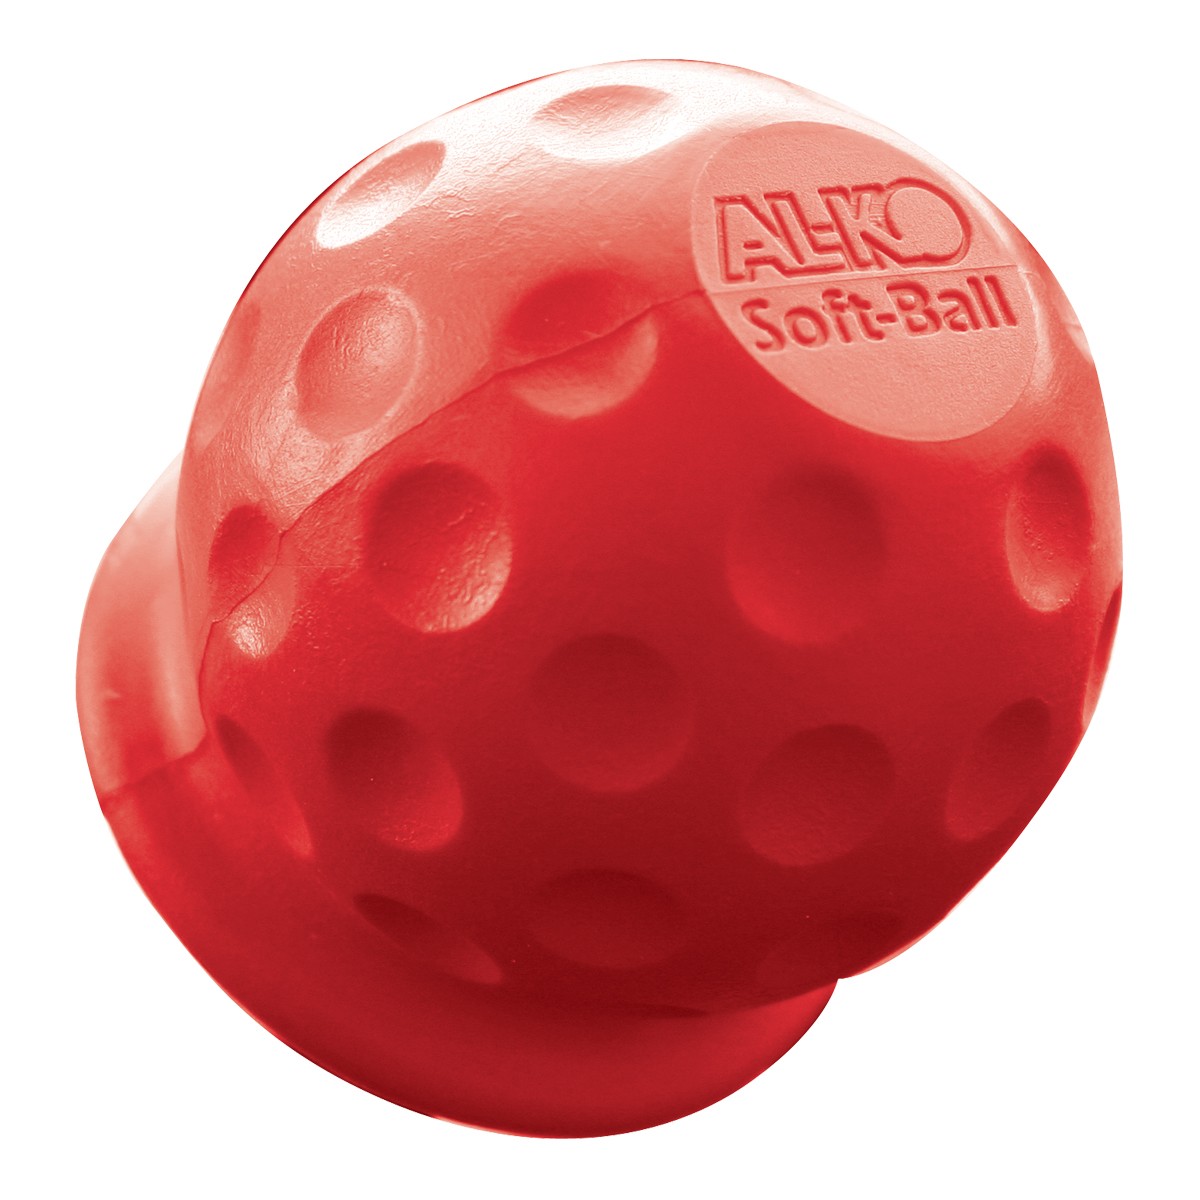 AL-KO soft ball for tow balls, protect your legs as well as the tow ball